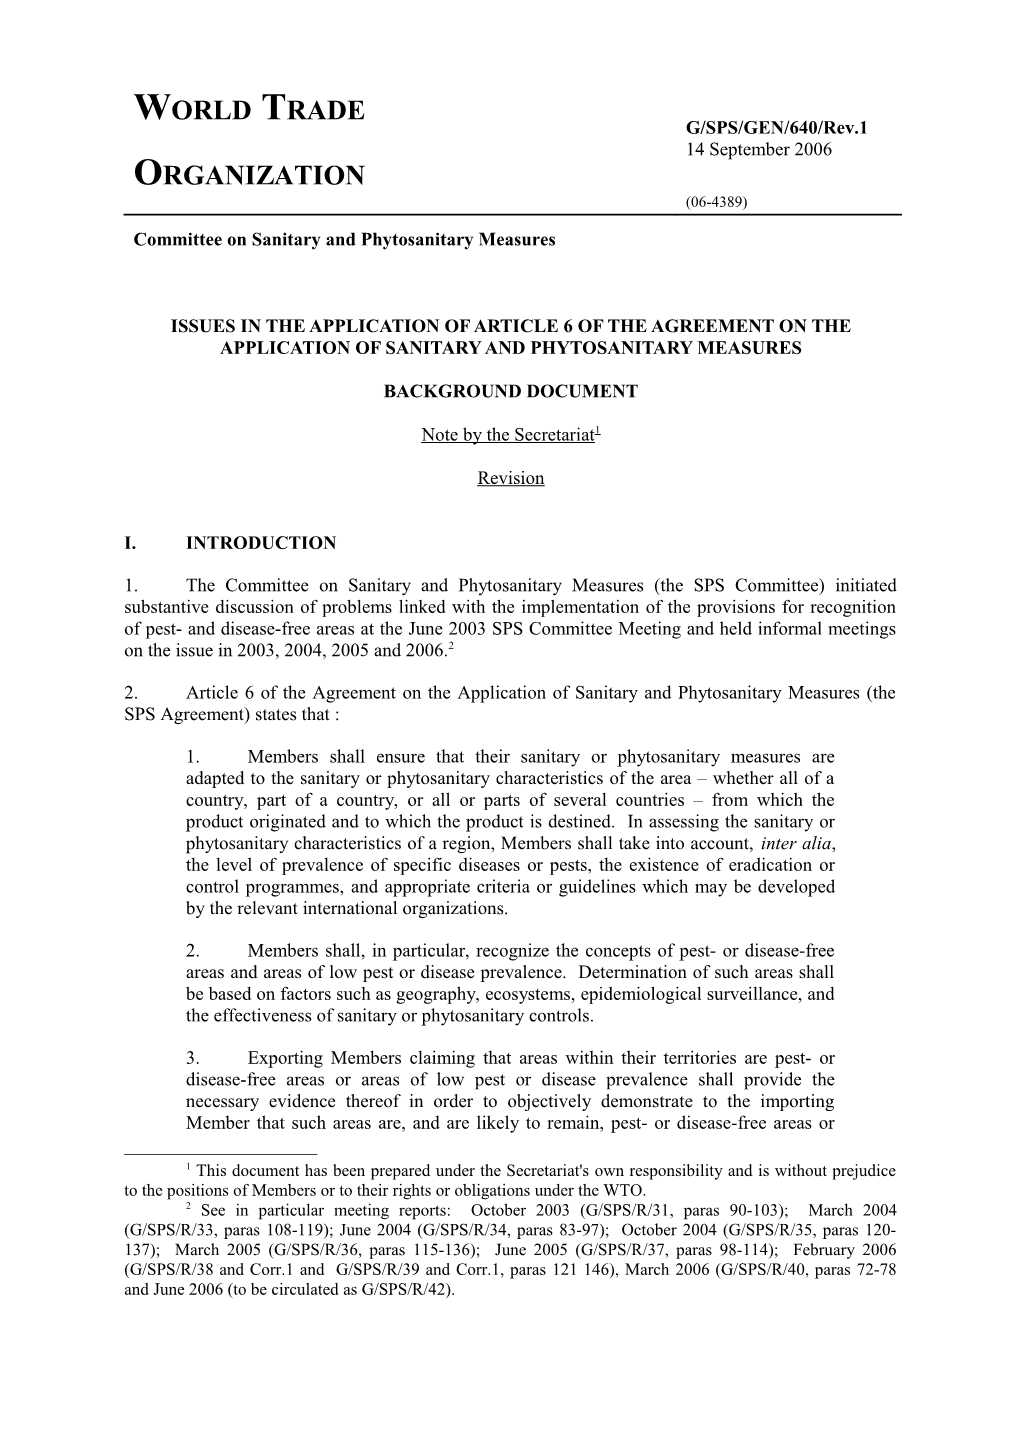 Issues in the Application of Article 6 of the AGREEMENT on the APPLICATION of SANITARY